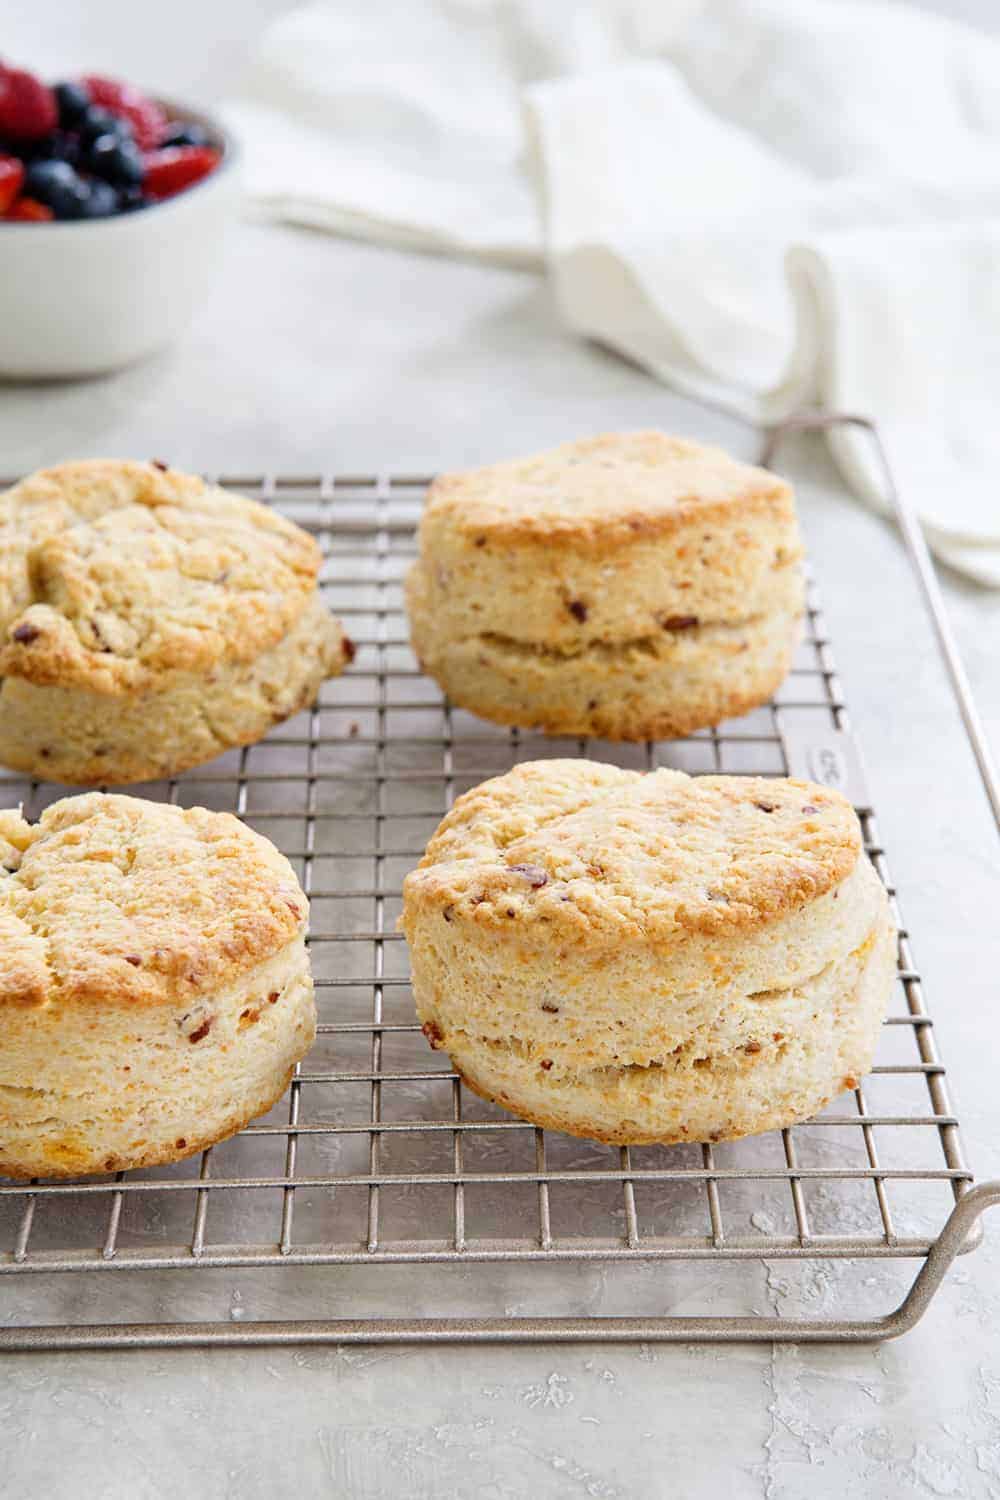 Bacon Cheddar Biscuits are tender, flaky, and full of flavor. They're perfect for breakfast sandwiches too!